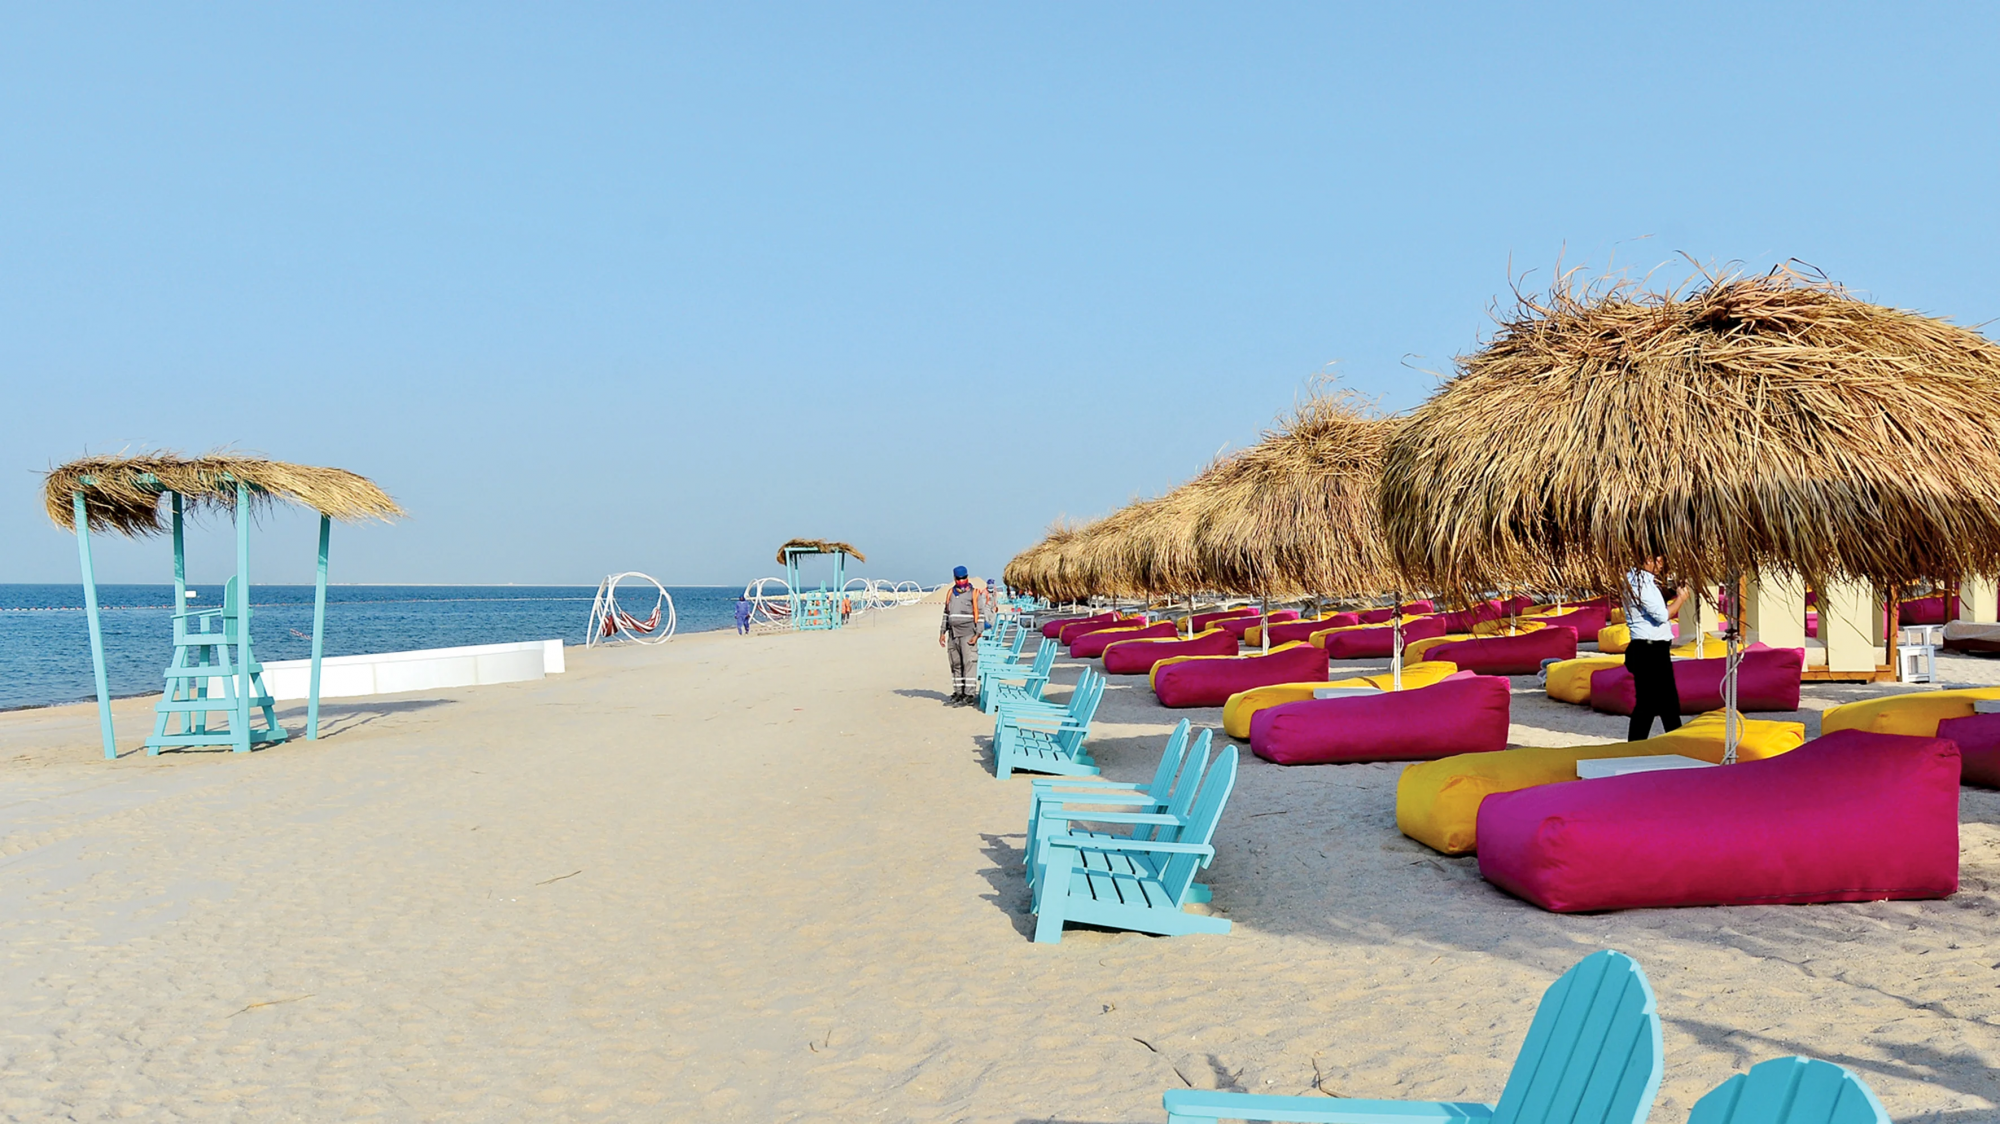 Qatar Tourism to Open "B12 Beach Club" in Doha in October